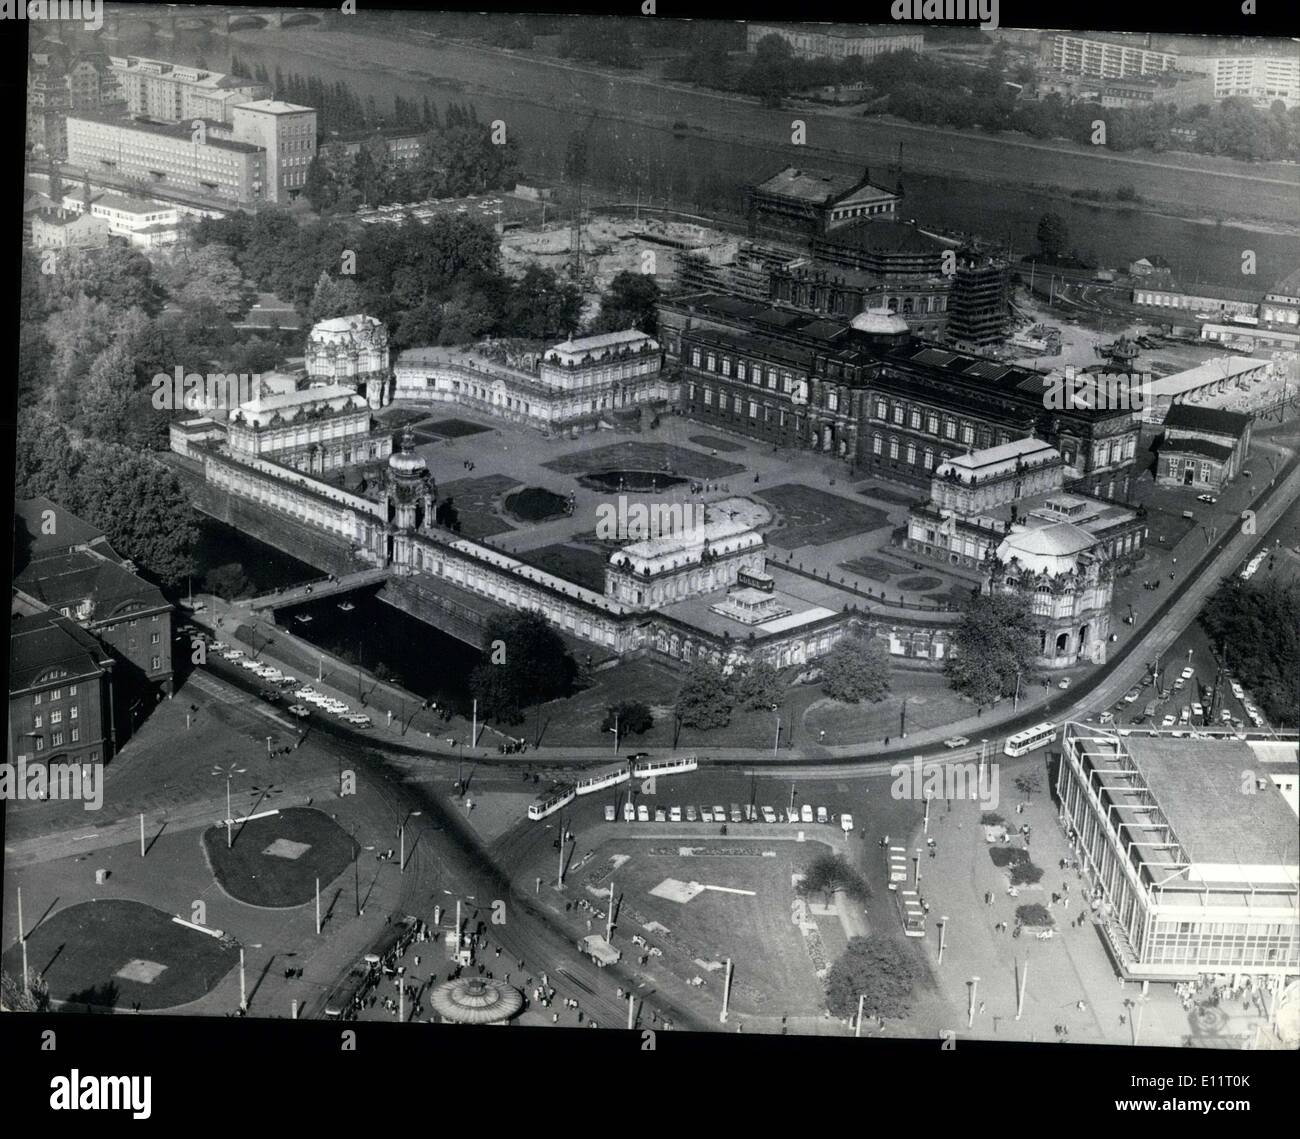 Jan. 30, 1980 - Dresden is again a world metropolis of art. From a bird's perspective we can see the Dresden Zwinger (1711-1728) and the Sempel Opera(1871-1878). Both were severely damaged during World War II. The Zwinger is now shining again and reconstruction on the opera house is currently in full swing. The opera house reconstruction should be completed by 1983. Stock Photo